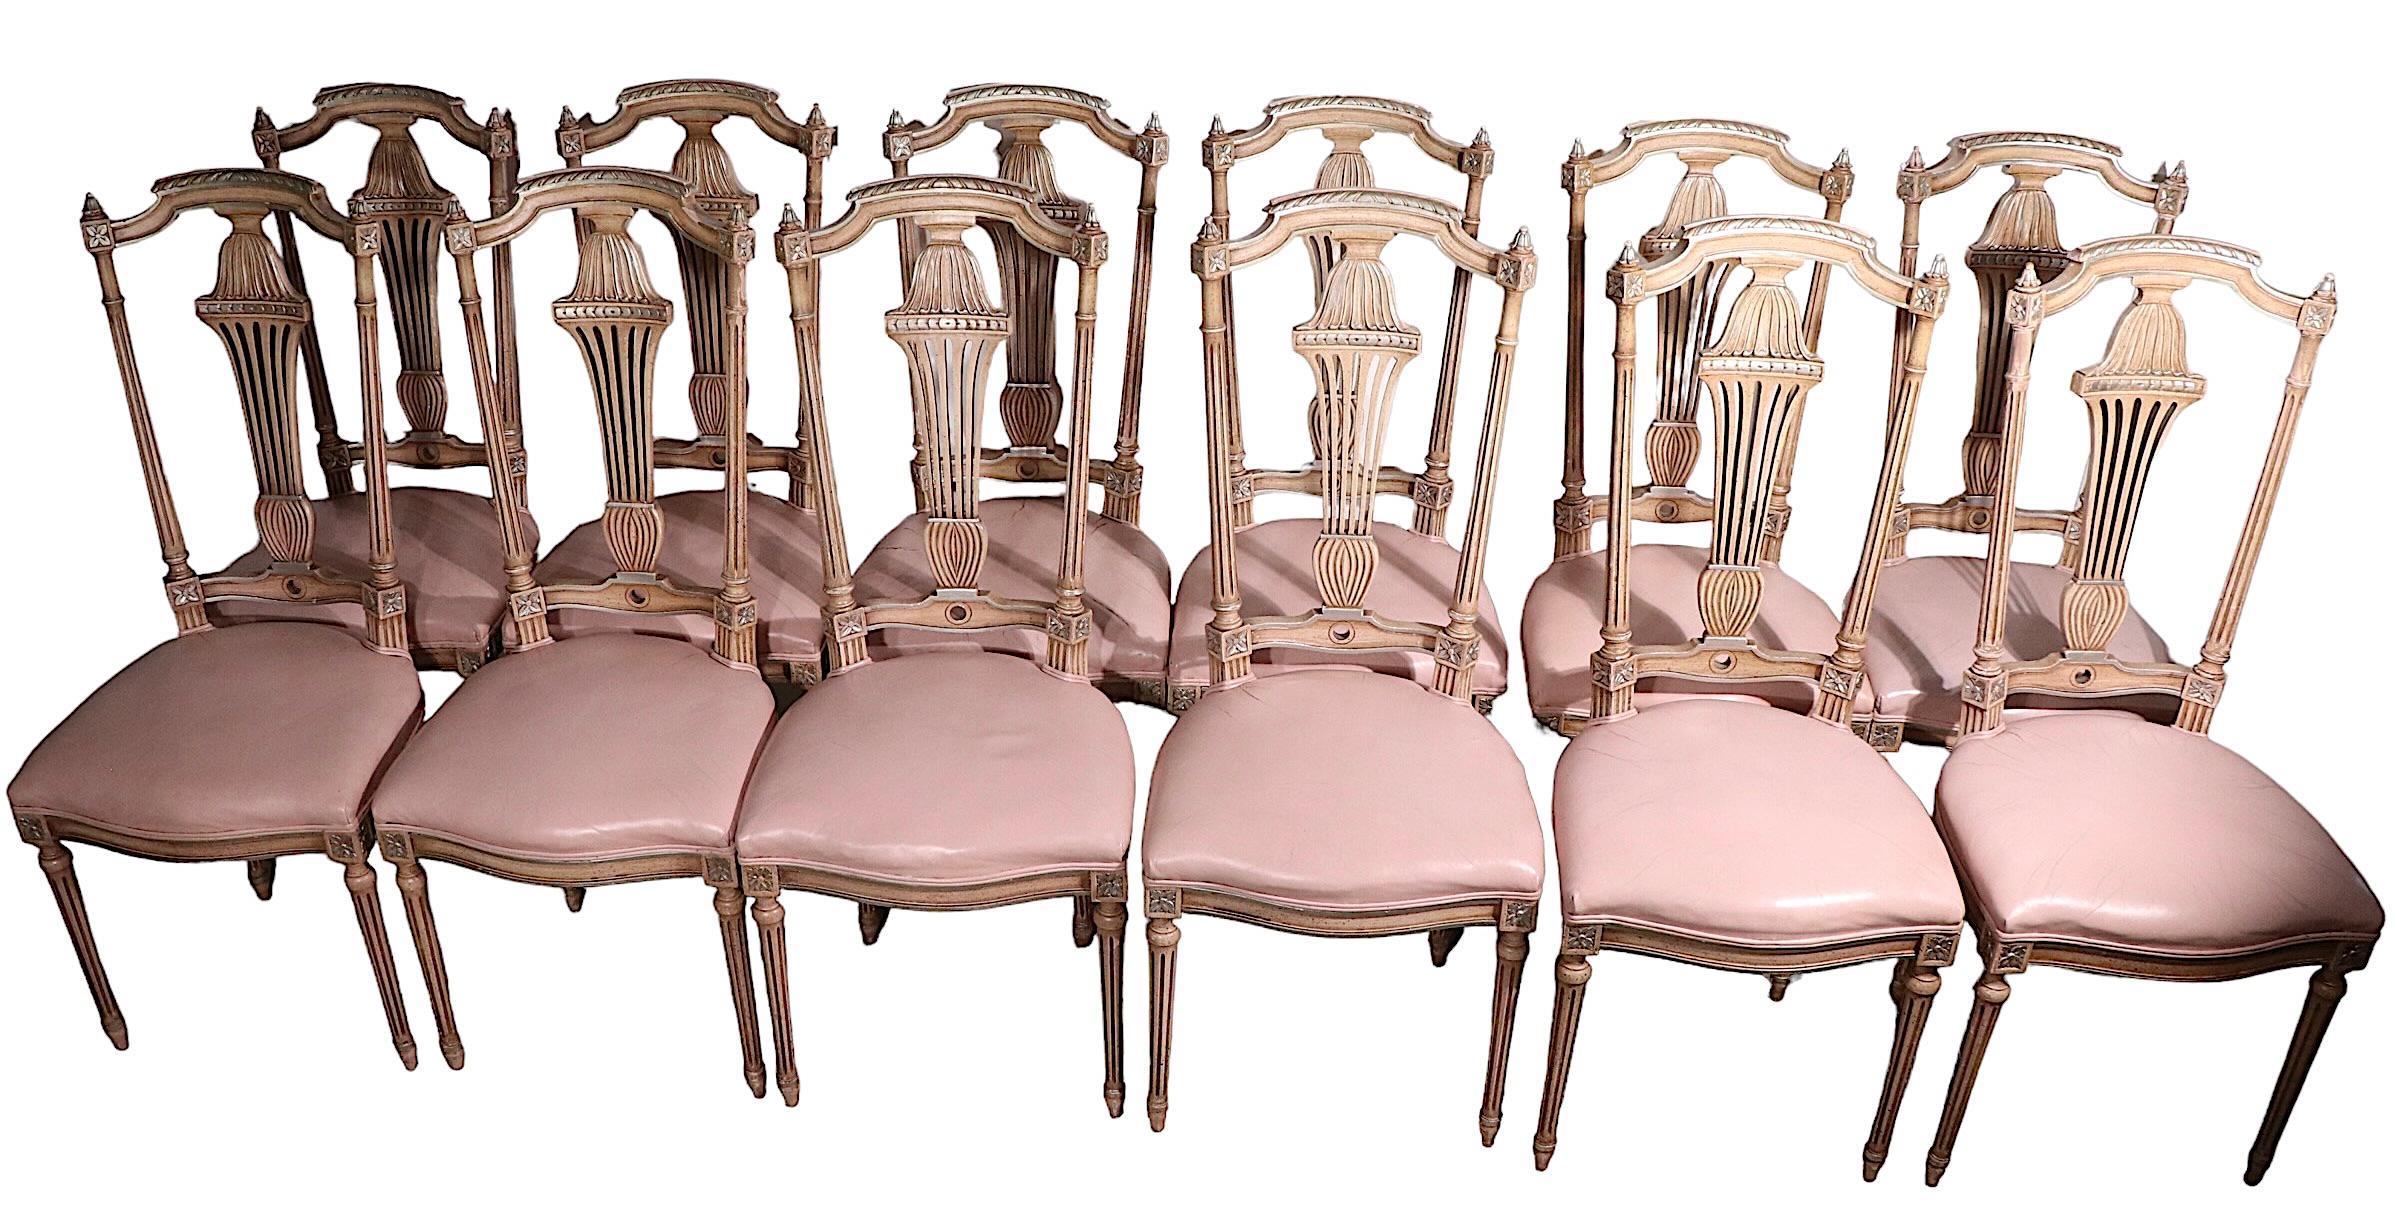 Stunning set of 12 matching dining chairs, of carved gilt, and painted, wood frames with unexpected and intriguing bubble gum pink leather seats. It is almost impossible to locate large sets of stylish dining chairs. These chairs were made in the